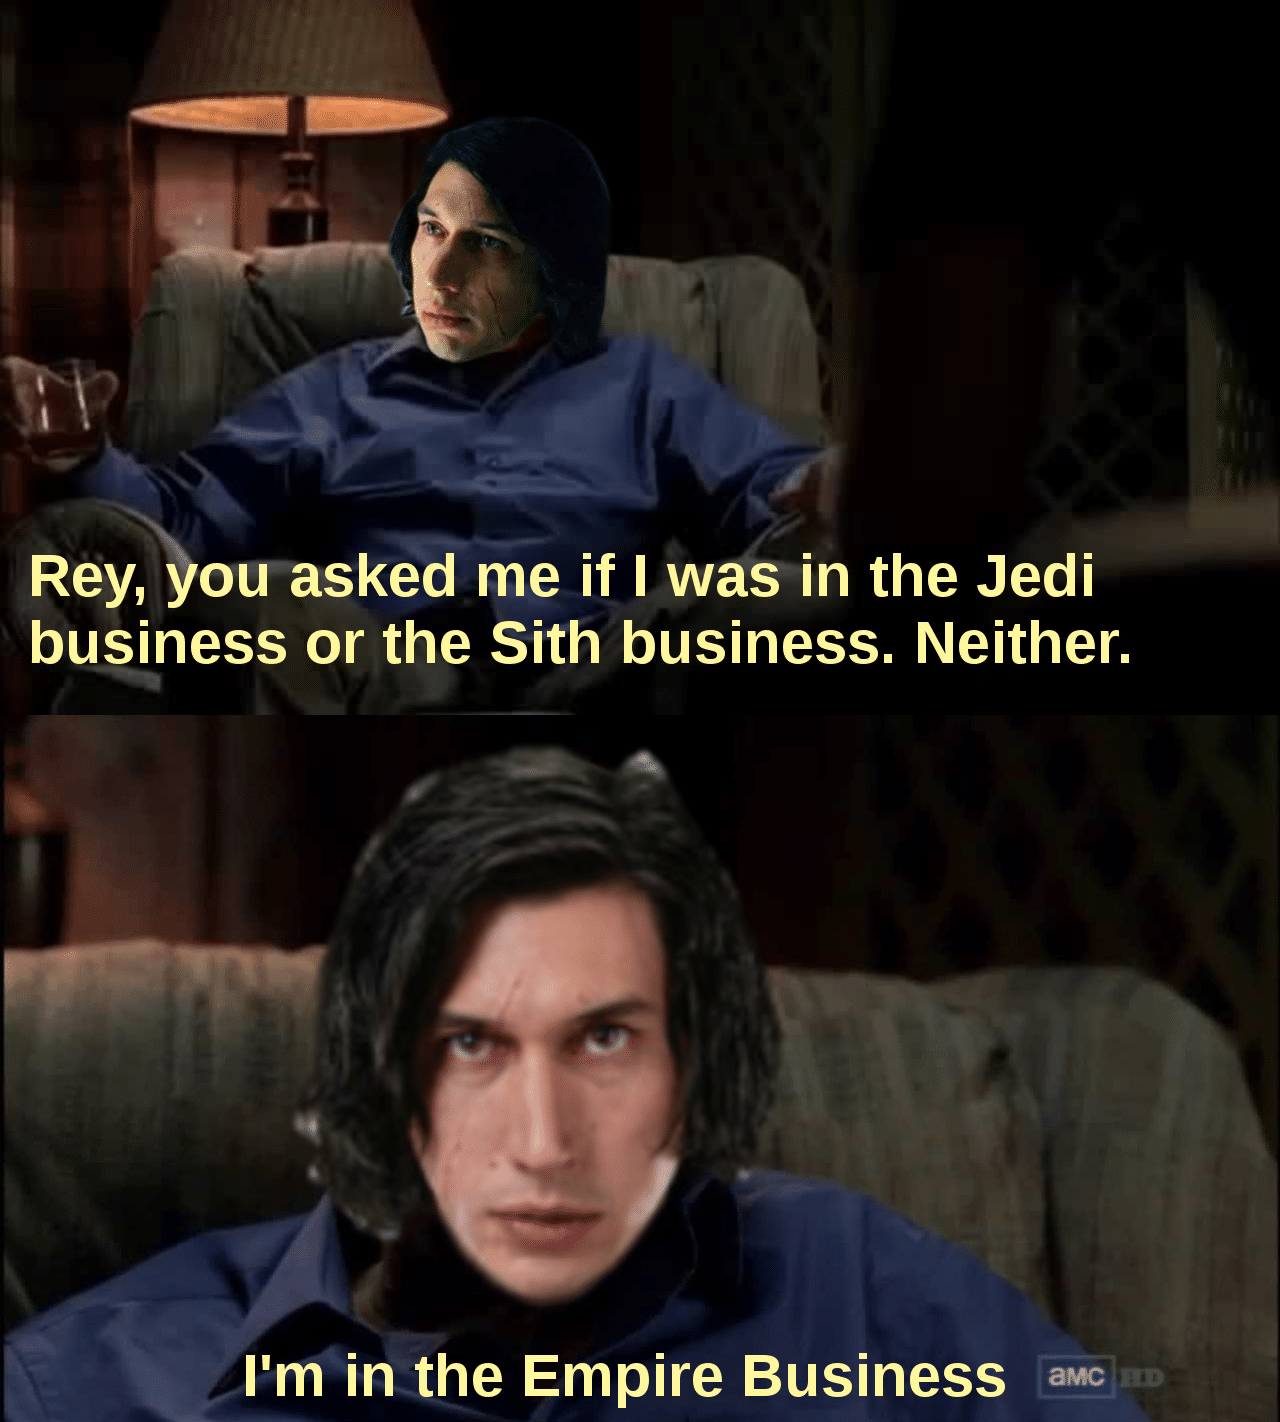 sith star-wars-memes sith text: Rey, owasked me if I was in the Jedi business or the Sith business. Neither. I'm in the Empire Business amc 